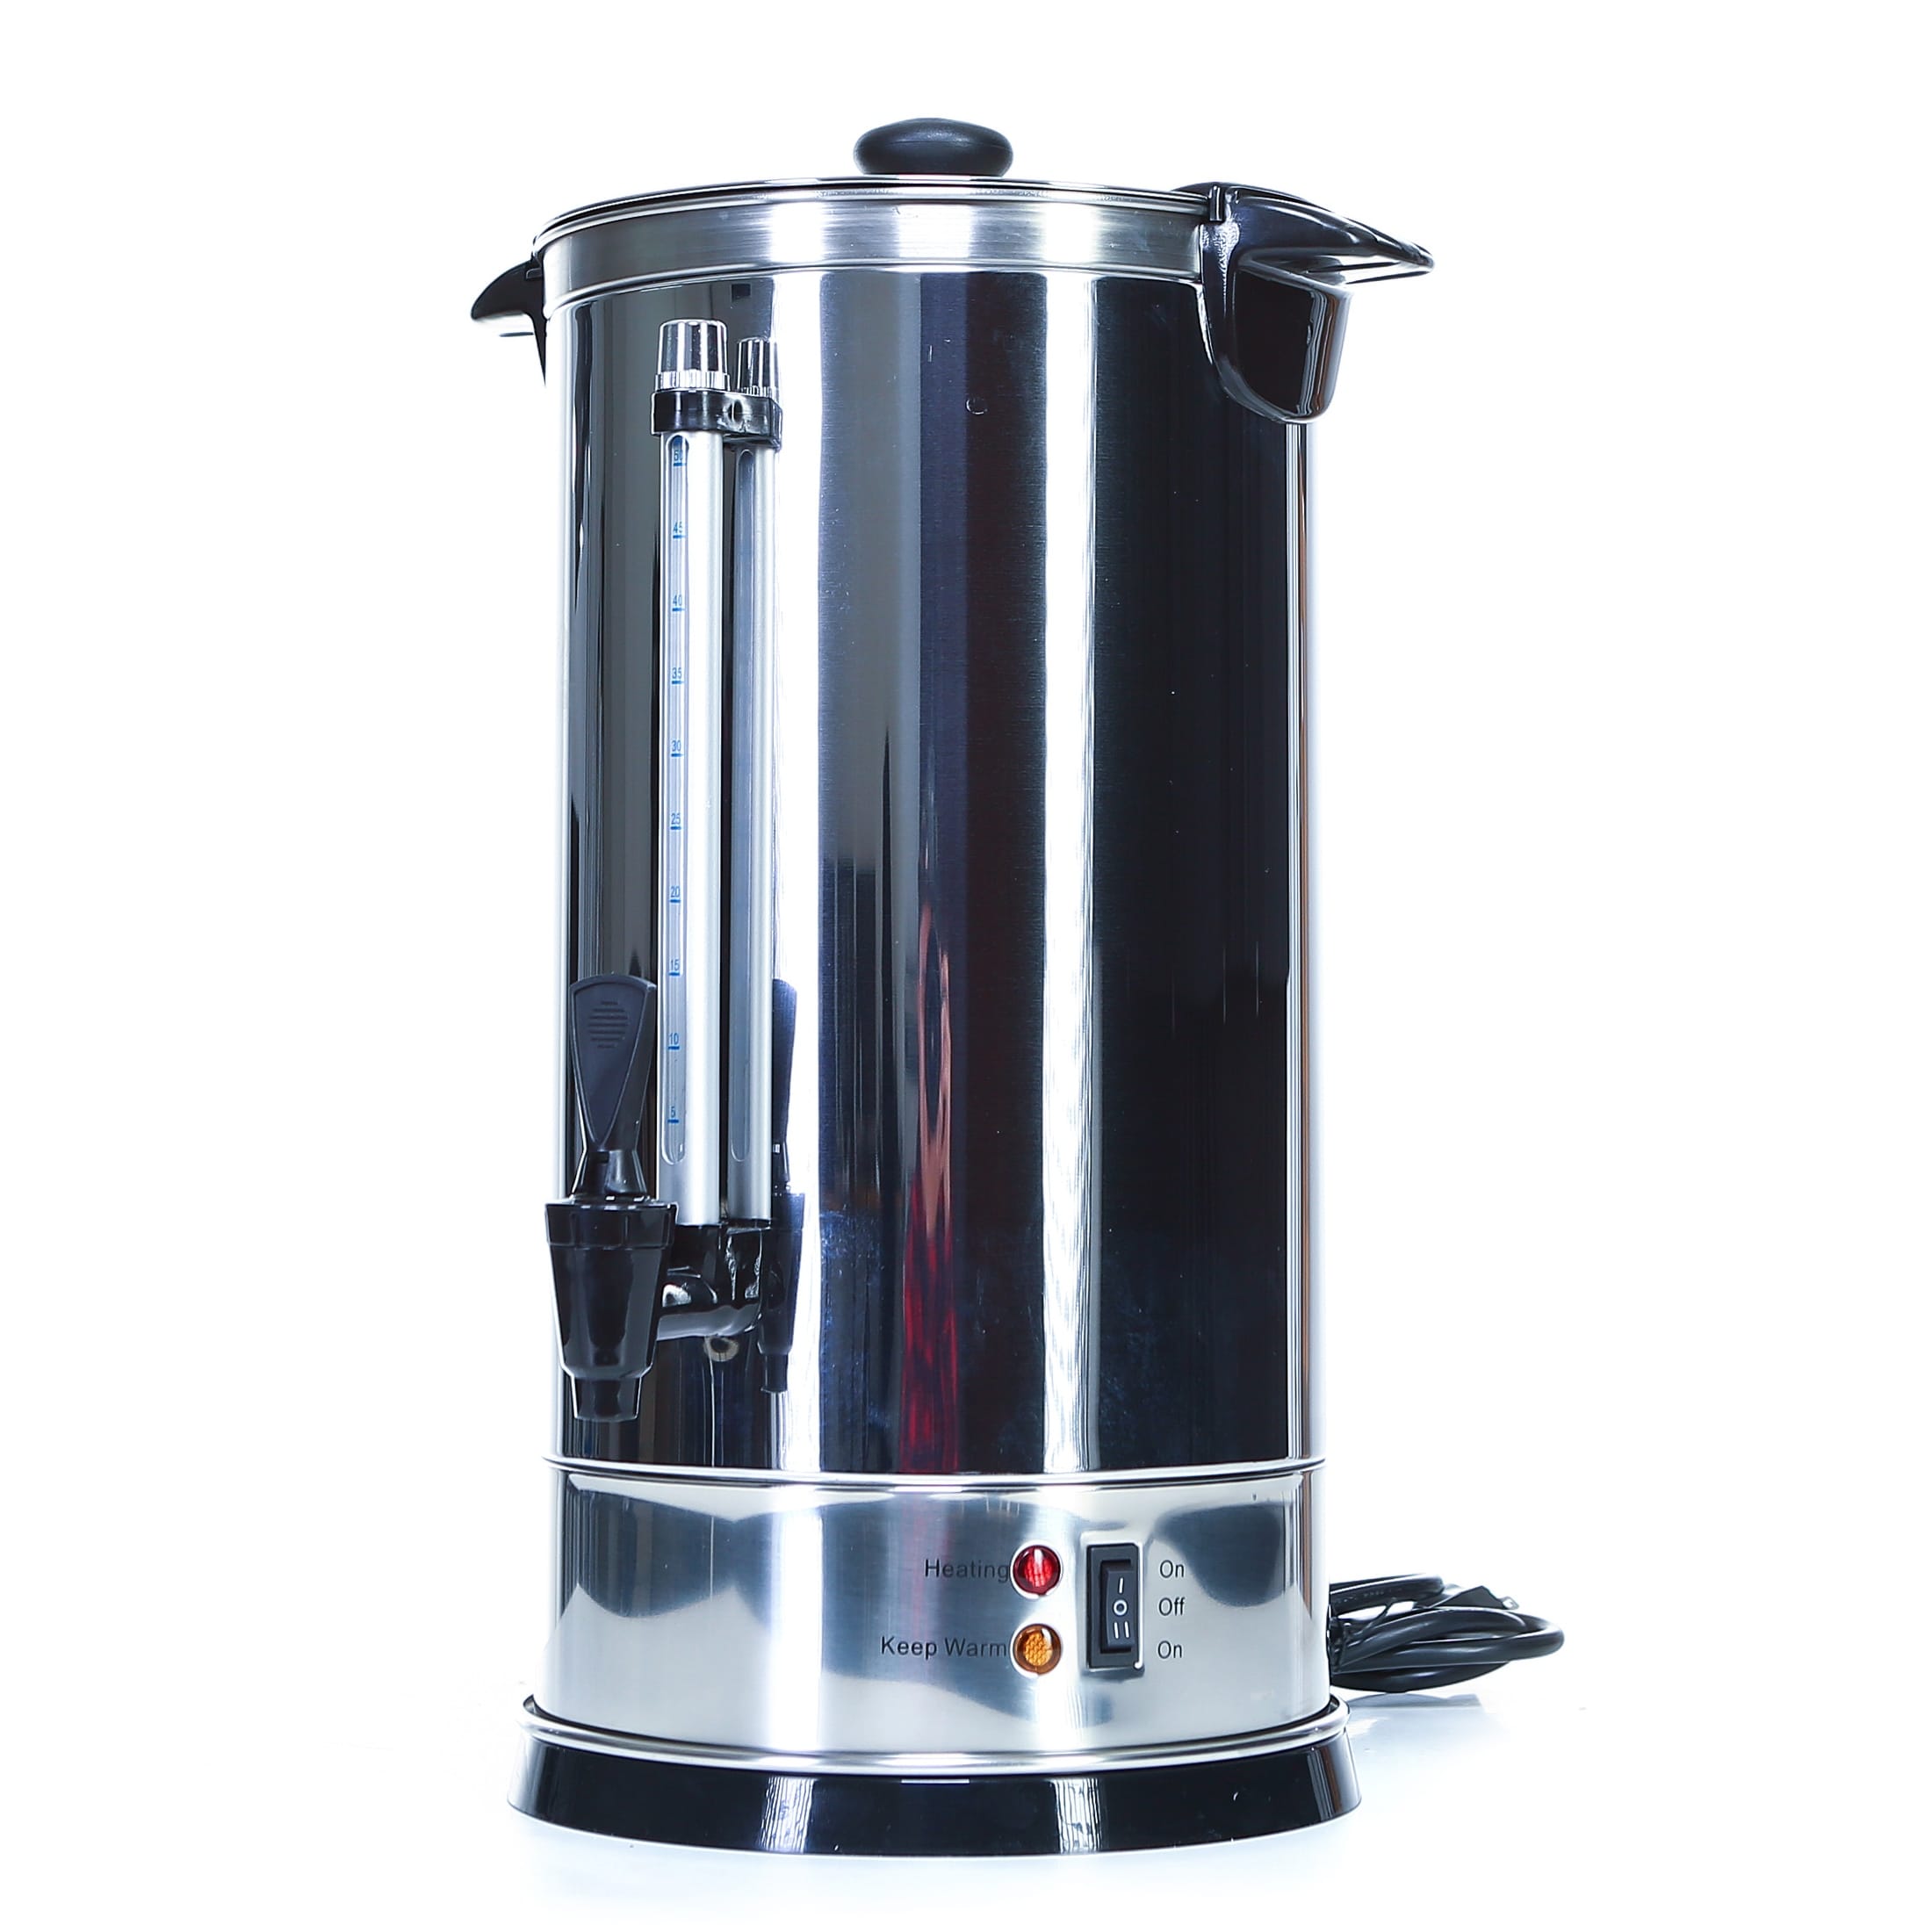 https://ak1.ostkcdn.com/images/products/is/images/direct/f4a1d75e0677b435a862921c4b16d463b7102a68/Shabbat-Automatic-Coffee-Urn-Stainless-Steel-Holiday-Jewish-Dinners.jpg